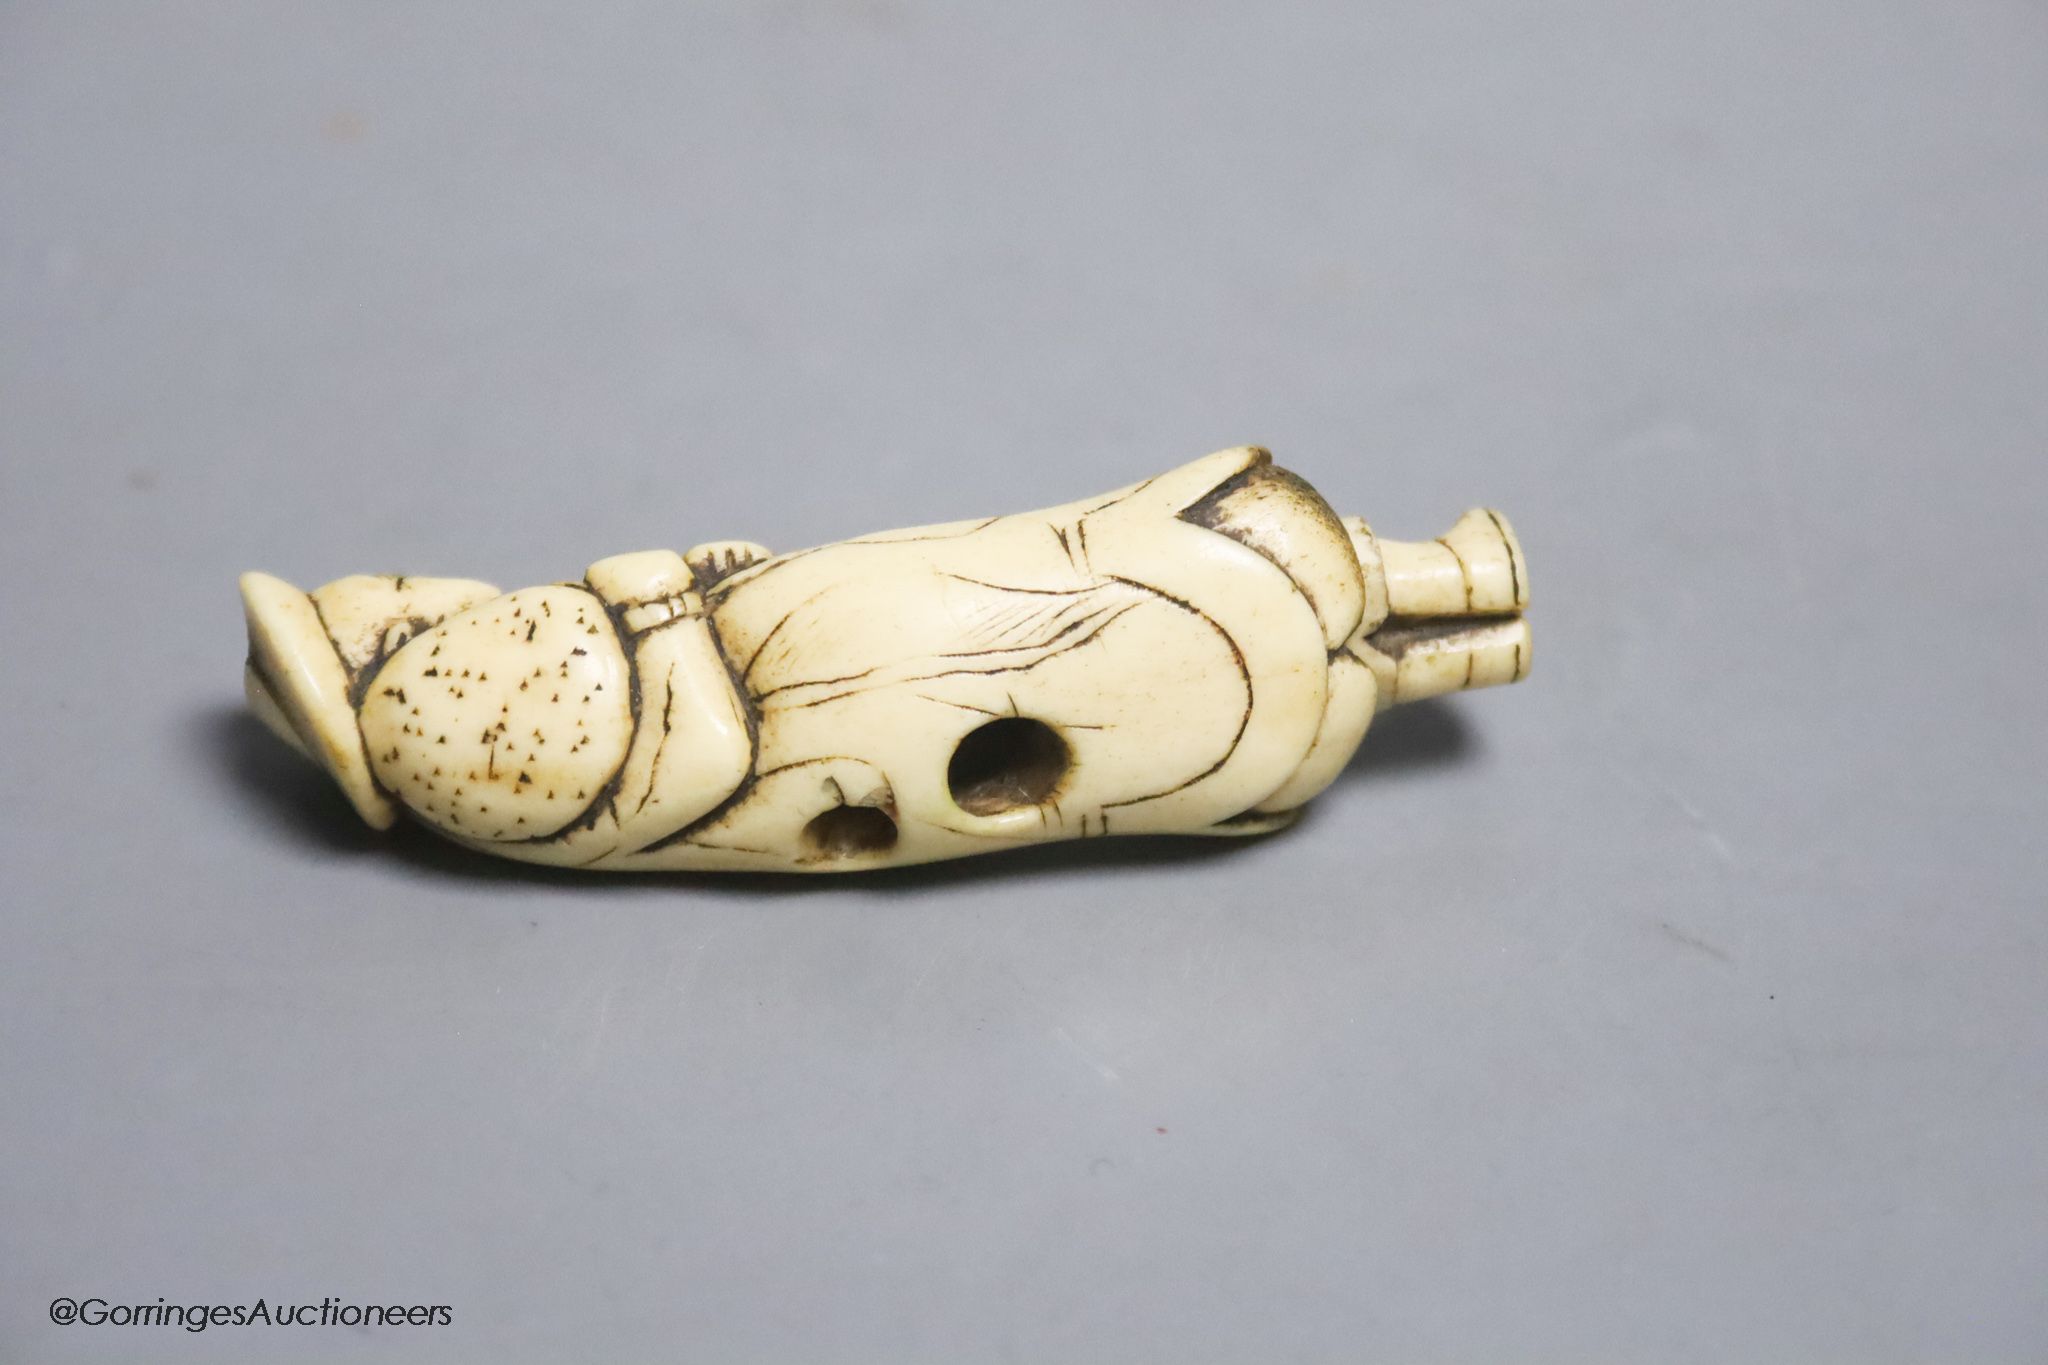 An 18th century Japanese stag antler netsuke of a Dutchman, 7cm